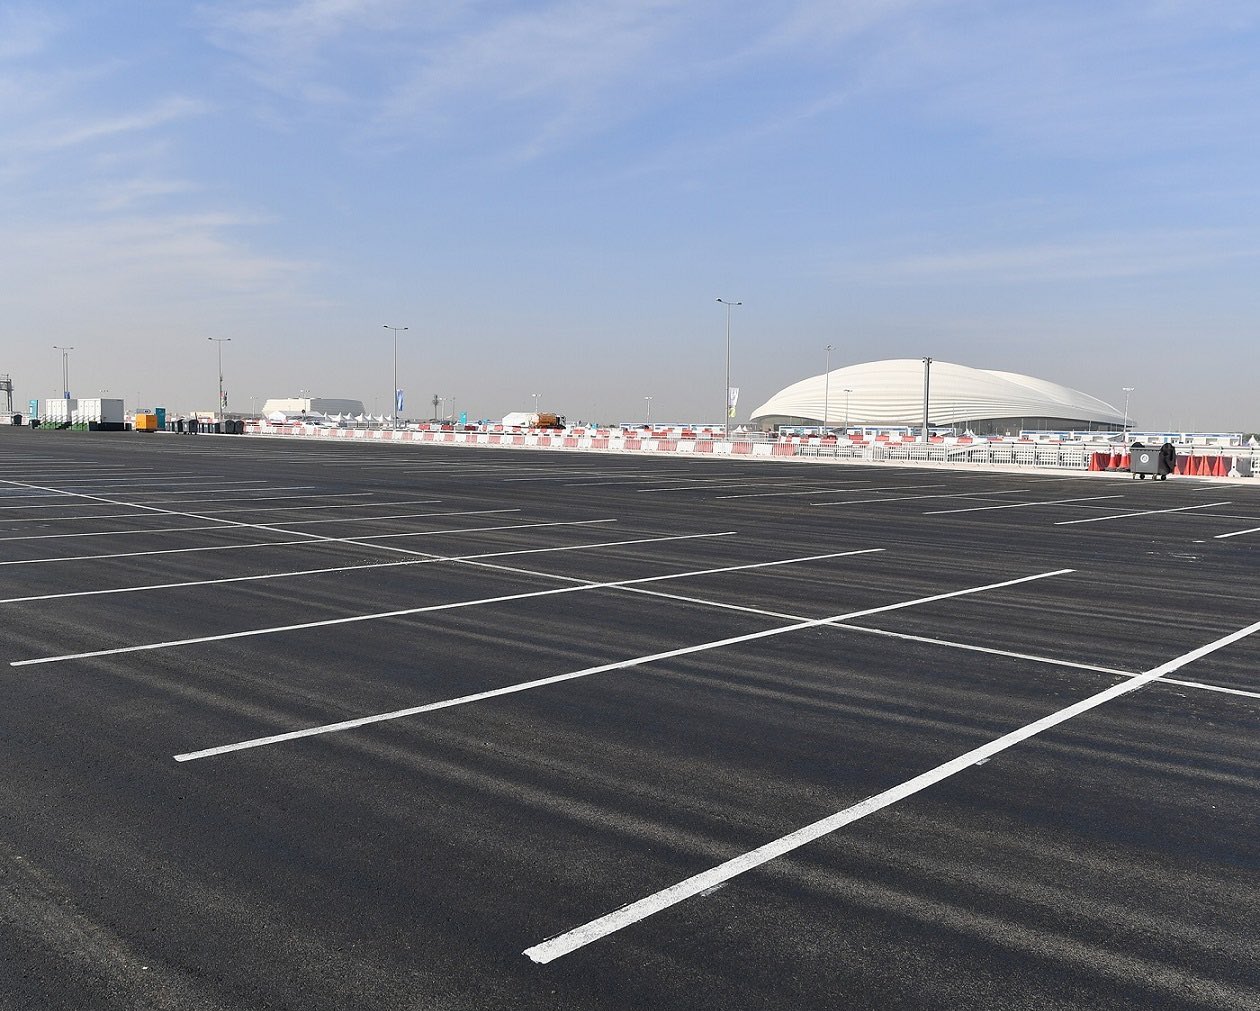 Ashghal Completes 50 Parking Lots in 3 Months to Serve 2021 Arab Cup